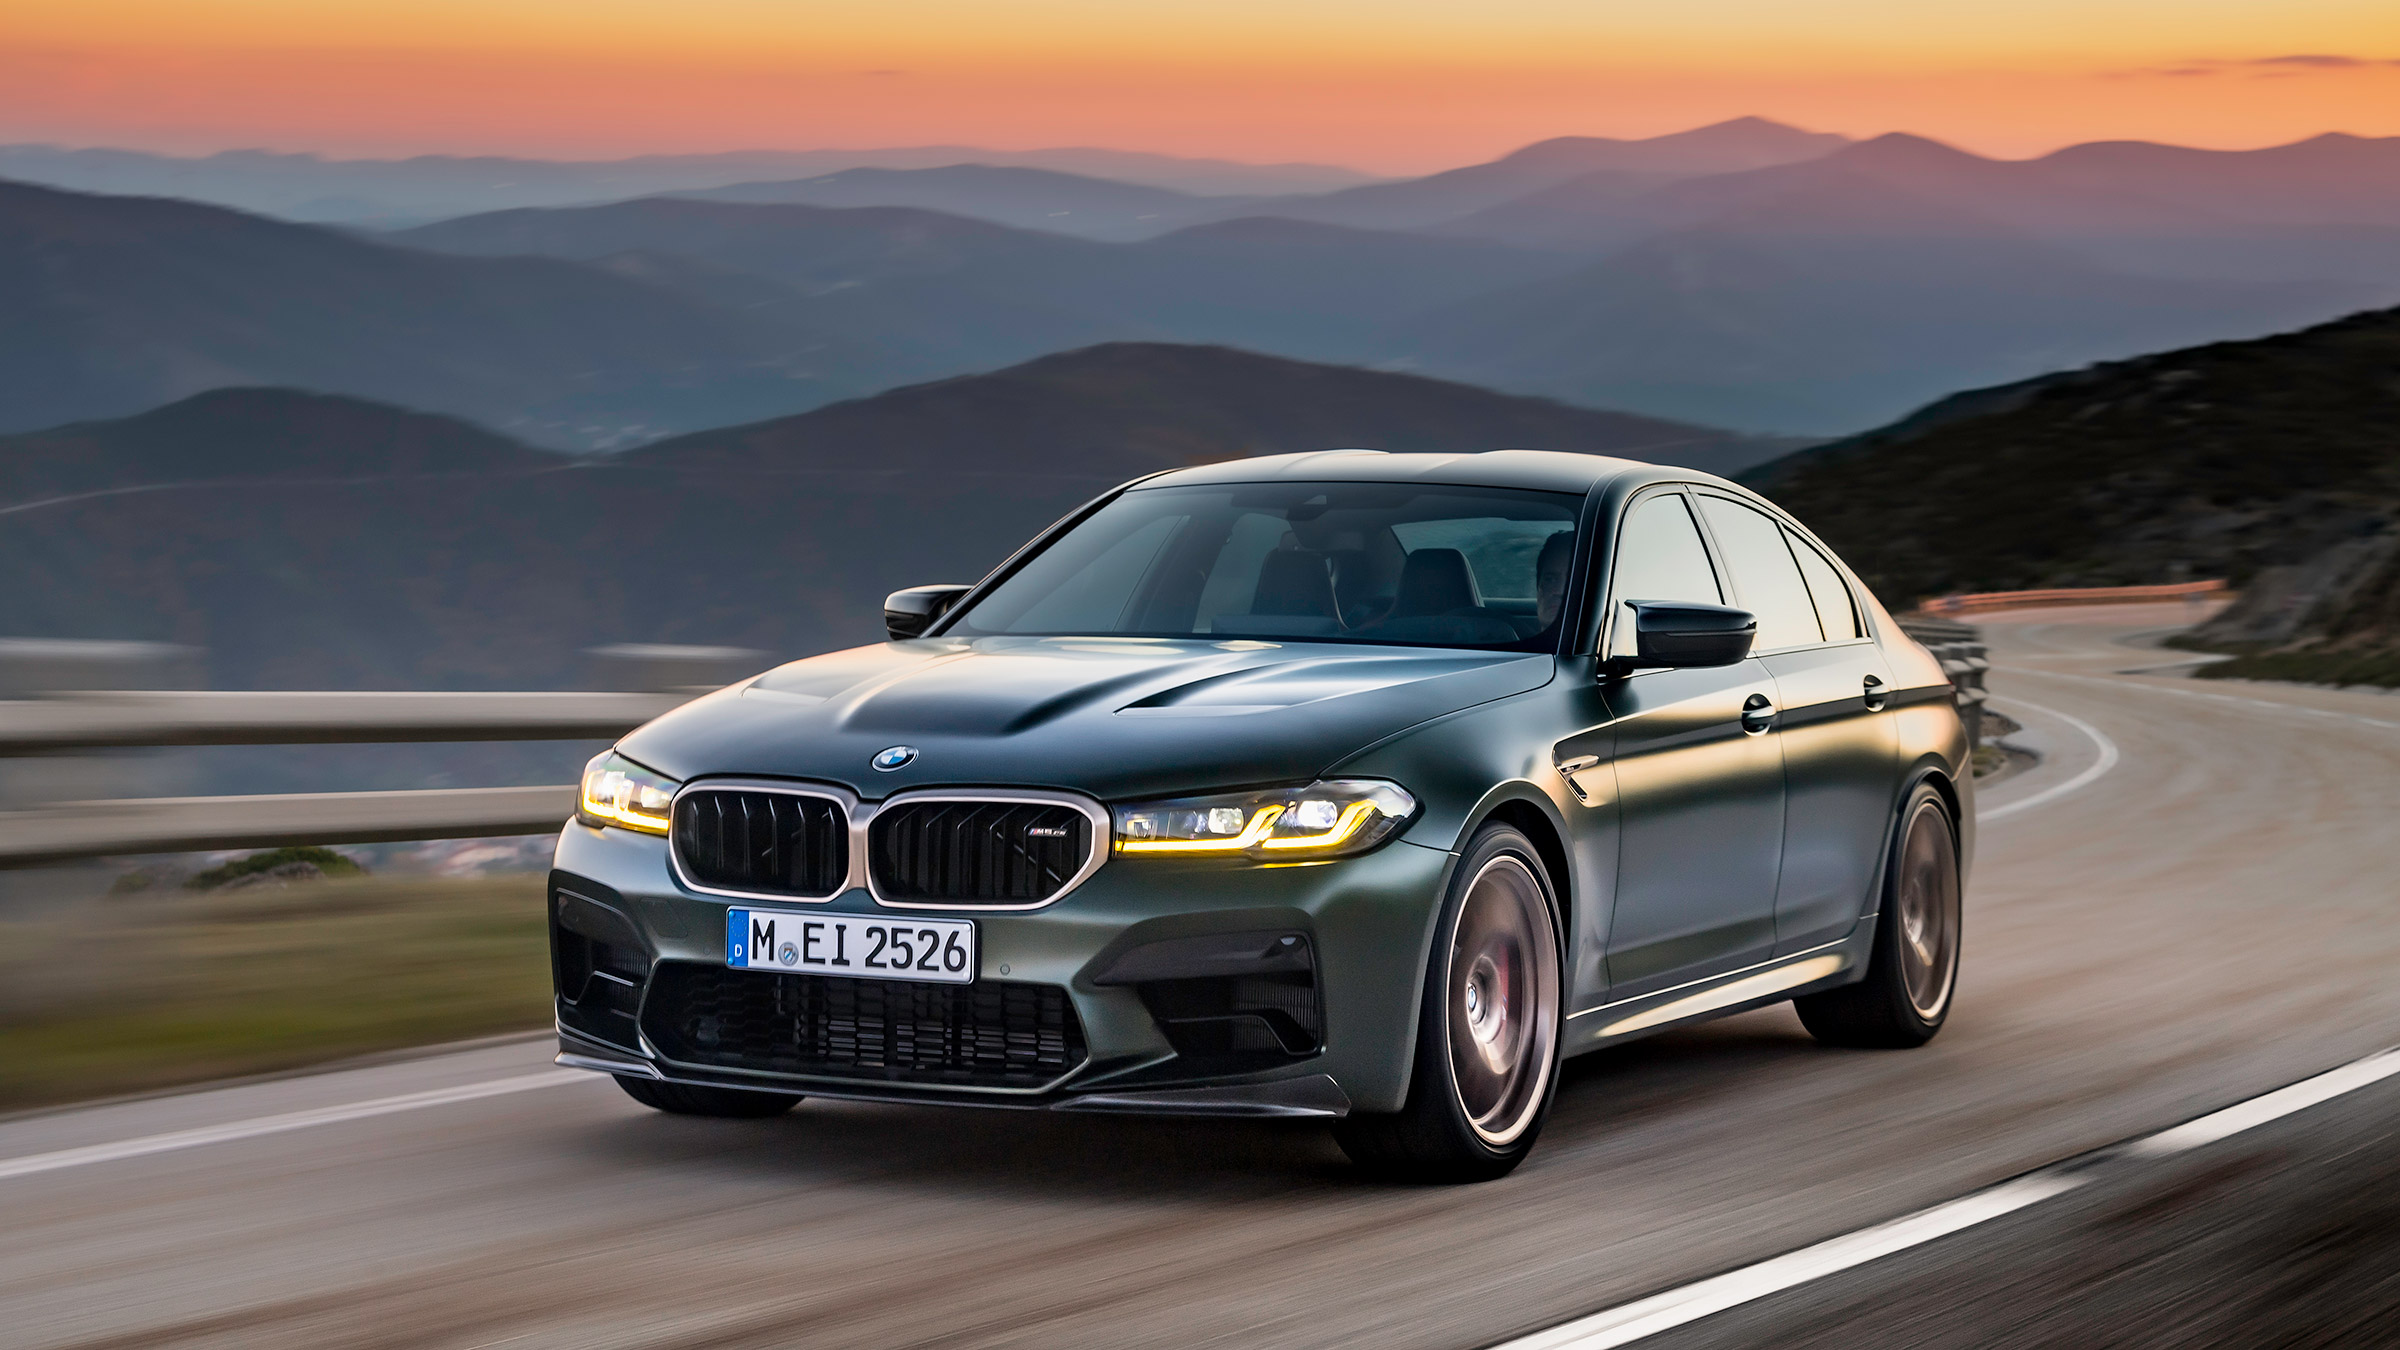 2021 BMW M5: Updates for the Ultimate 5 Series